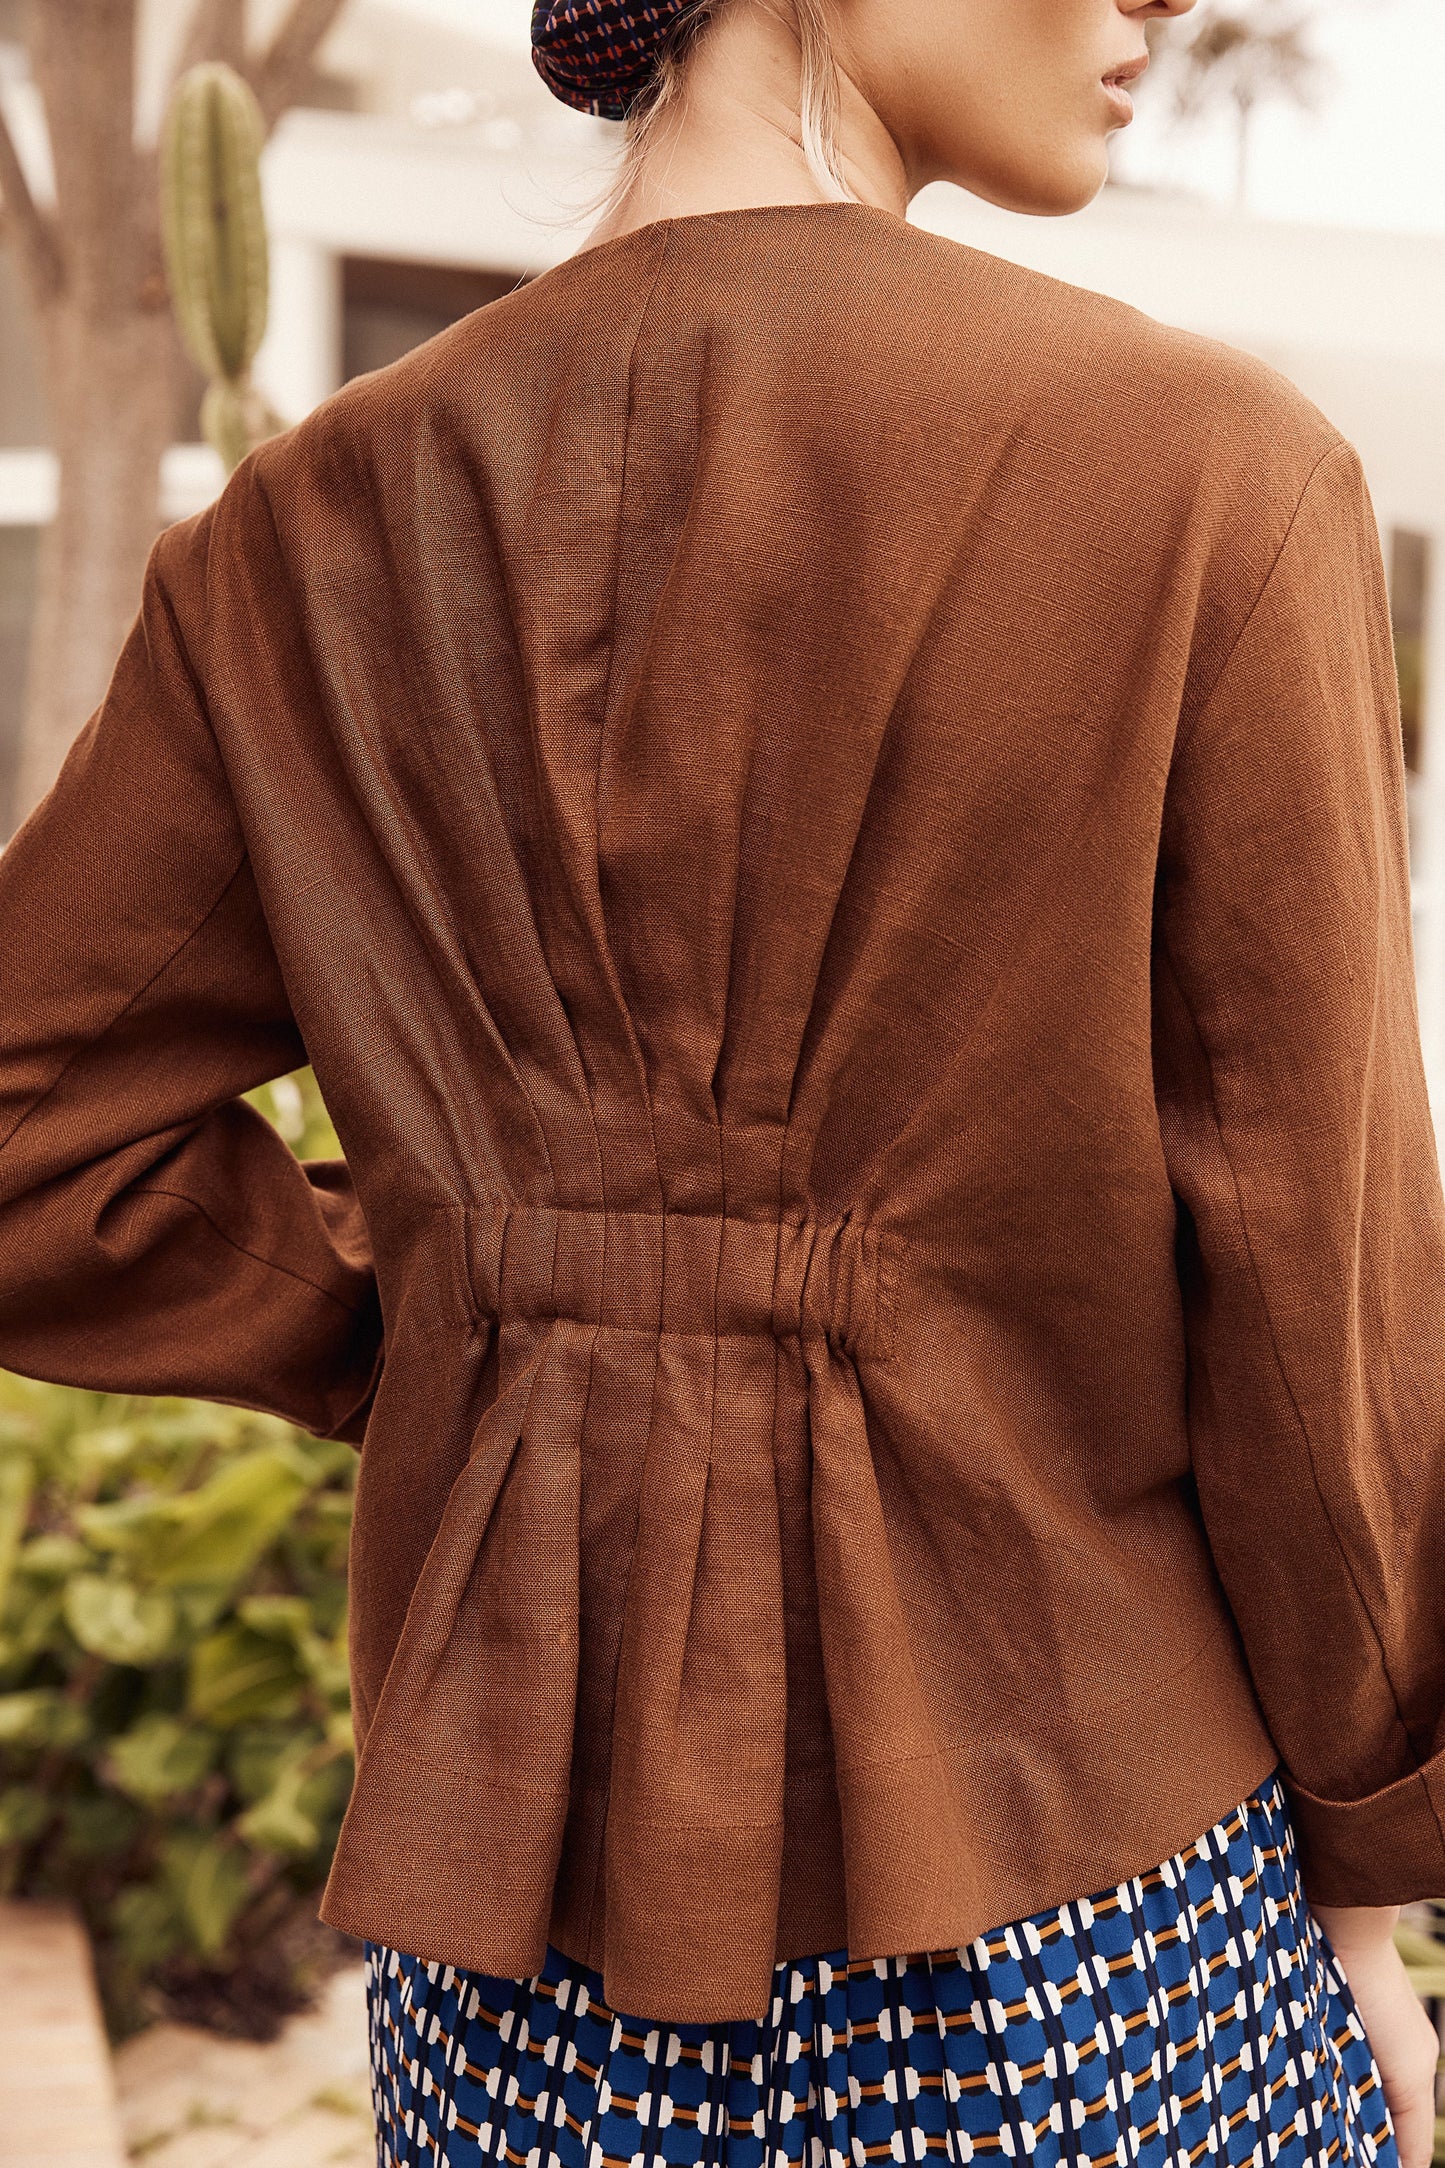 Fiene French Linen Light Weight Jacket Campaign back | BRONZE BROWN